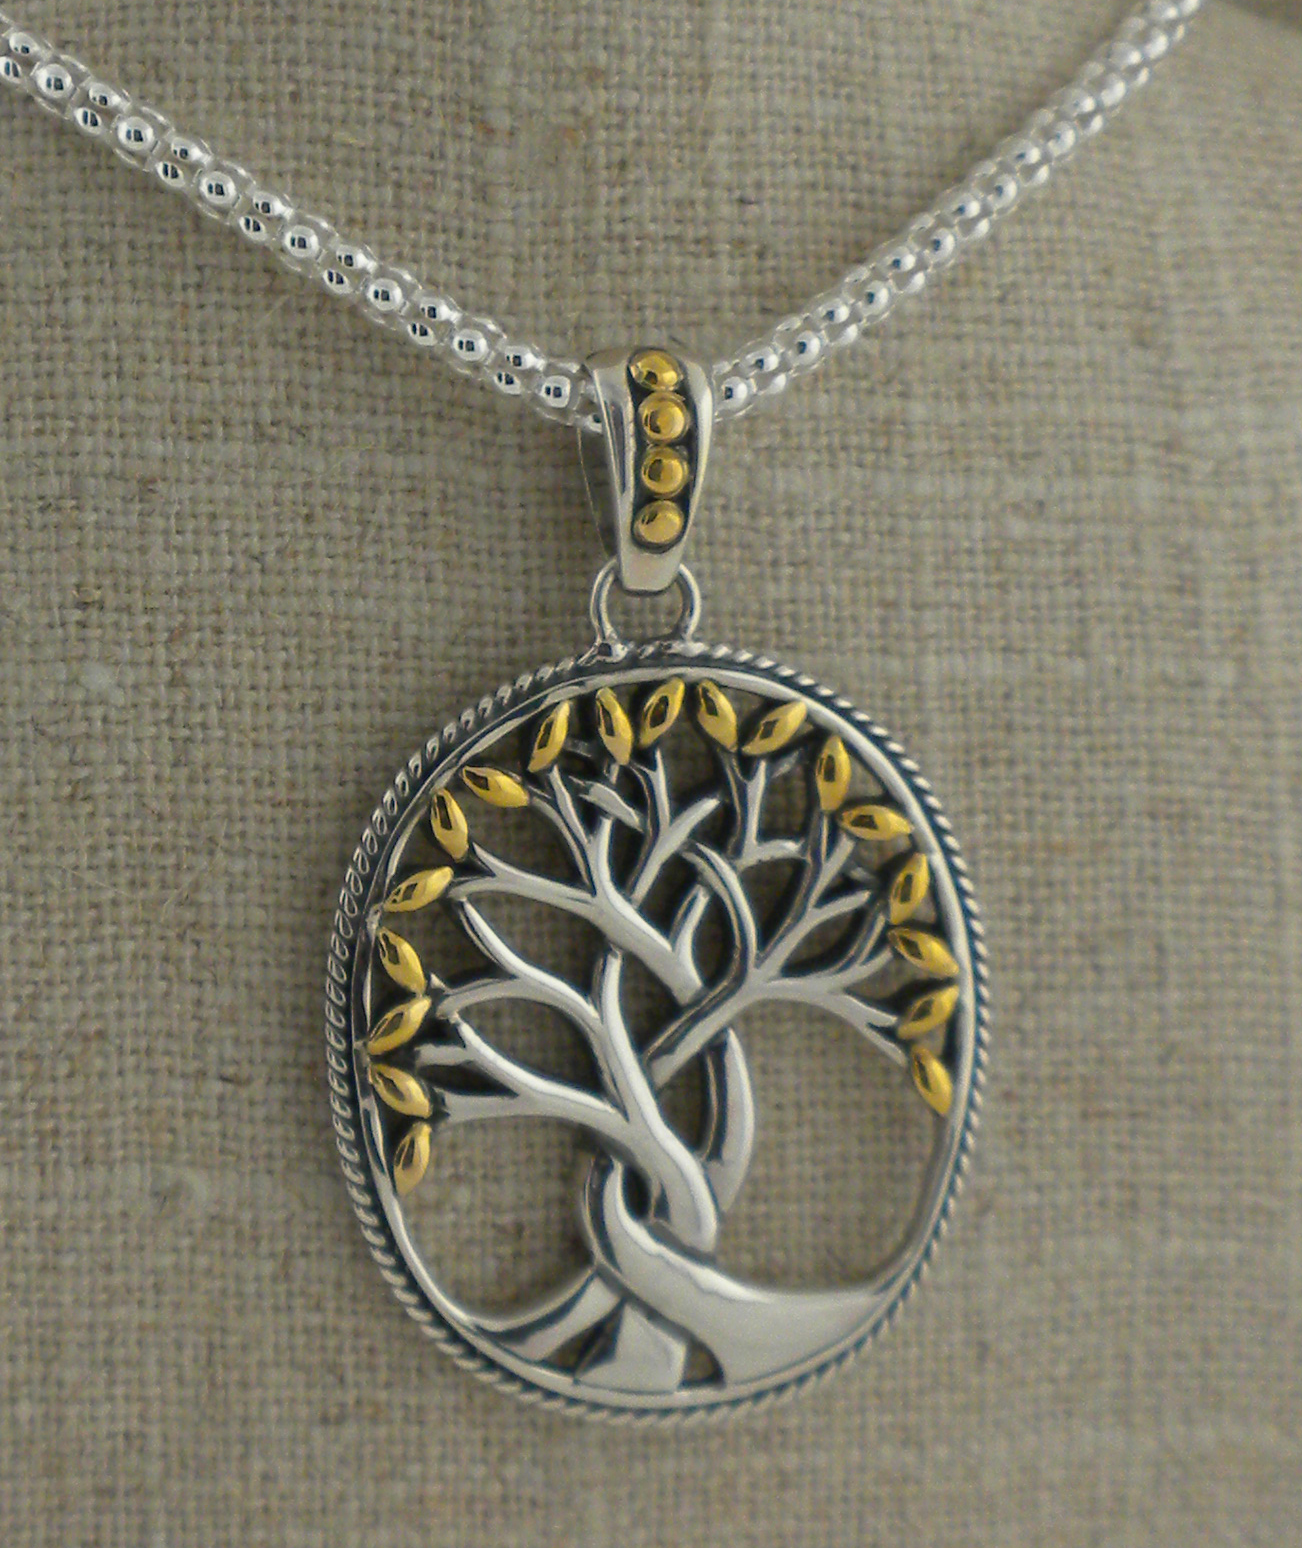 Copy of Celtic Tree of Life Pendant in Sterling Silver (Copy)